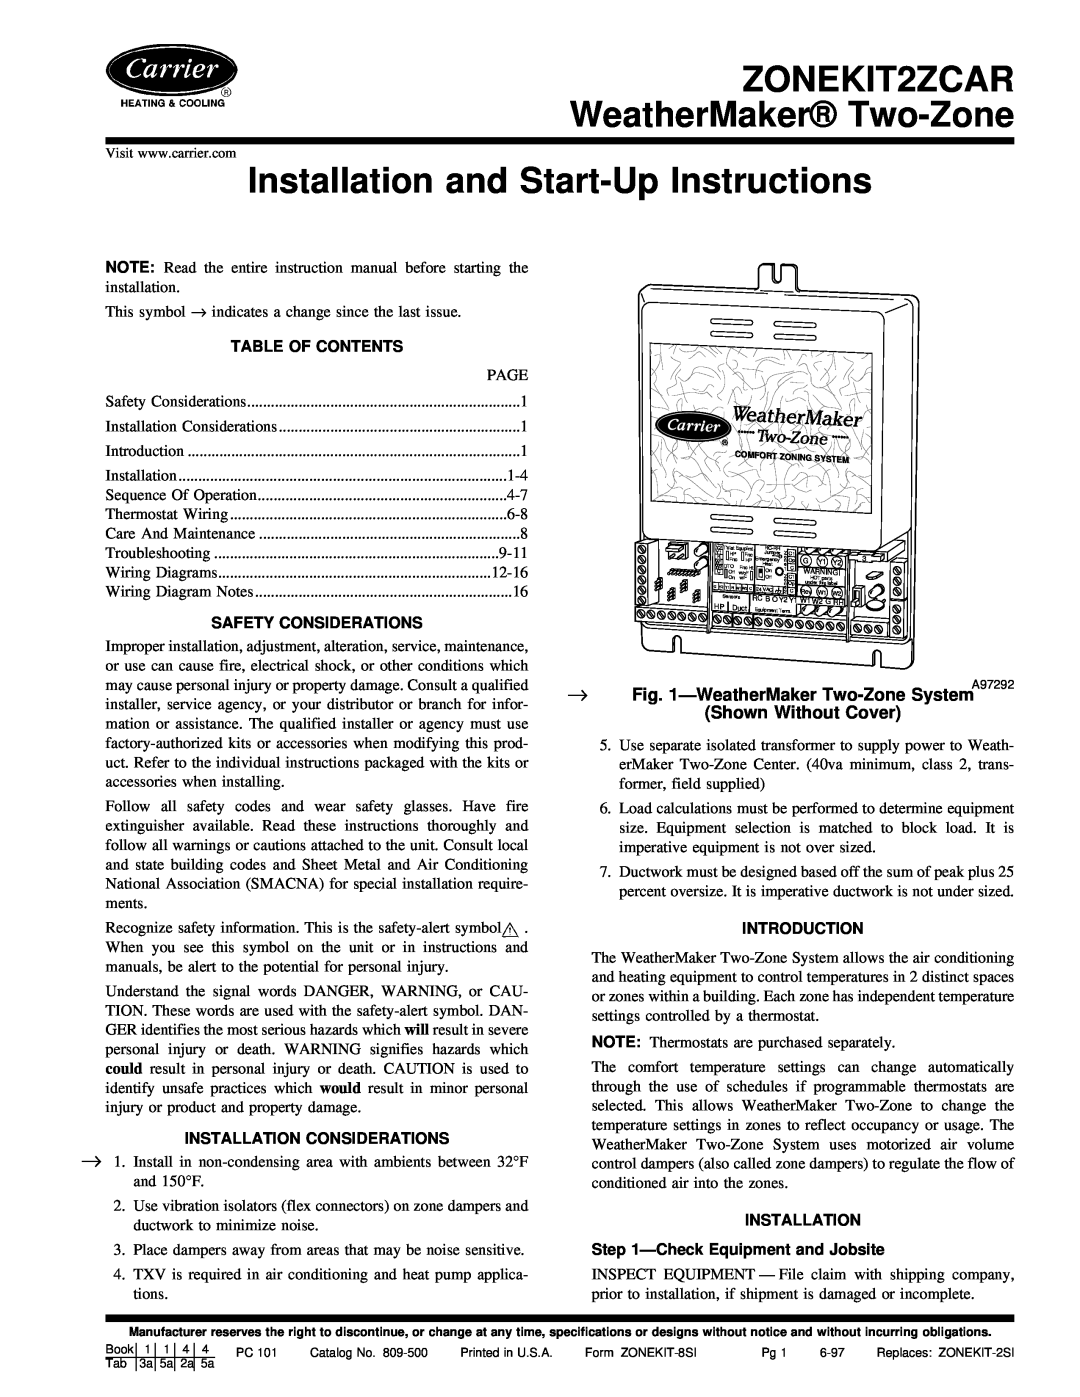 Carrier instruction manual ZONEKIT2ZCAR WeatherMaker Two-Zone, Installation and Start-UpInstructions, Table Of Contents 